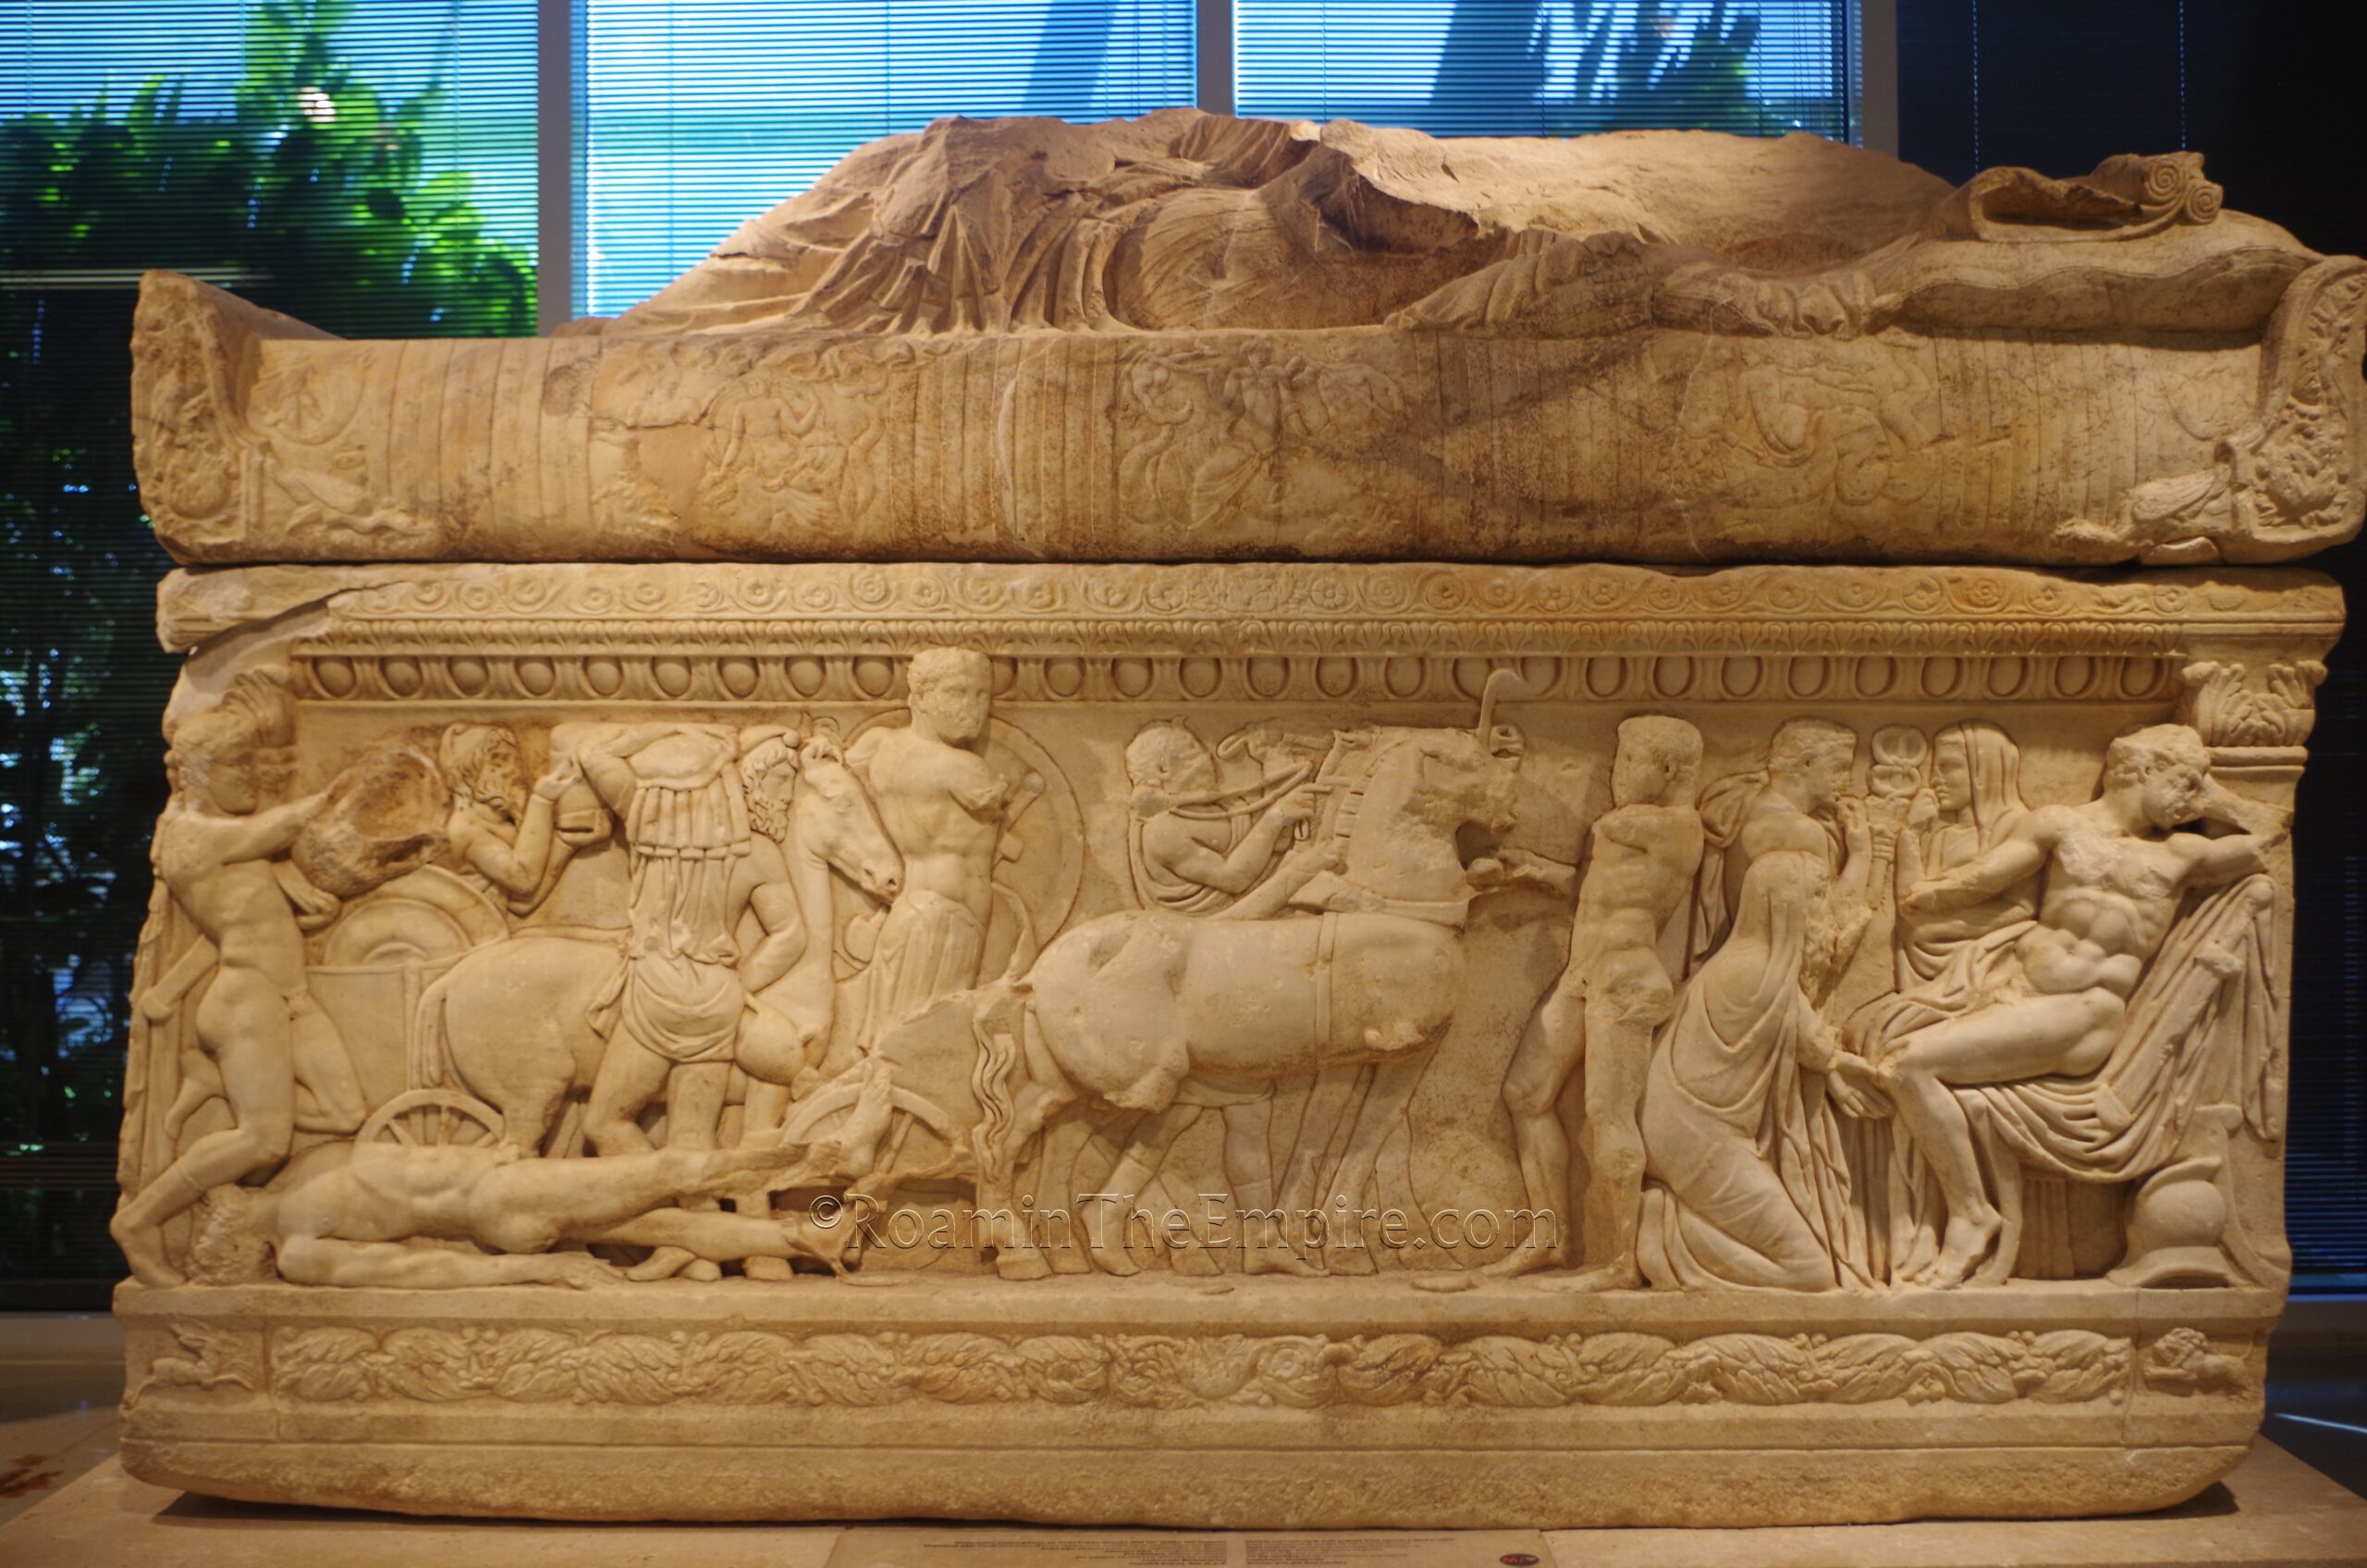 Marble sarcophagus from the 2nd century CE depicting the death of Hector. Found in Ladokhori. Archaeological Museum of Ioannina.